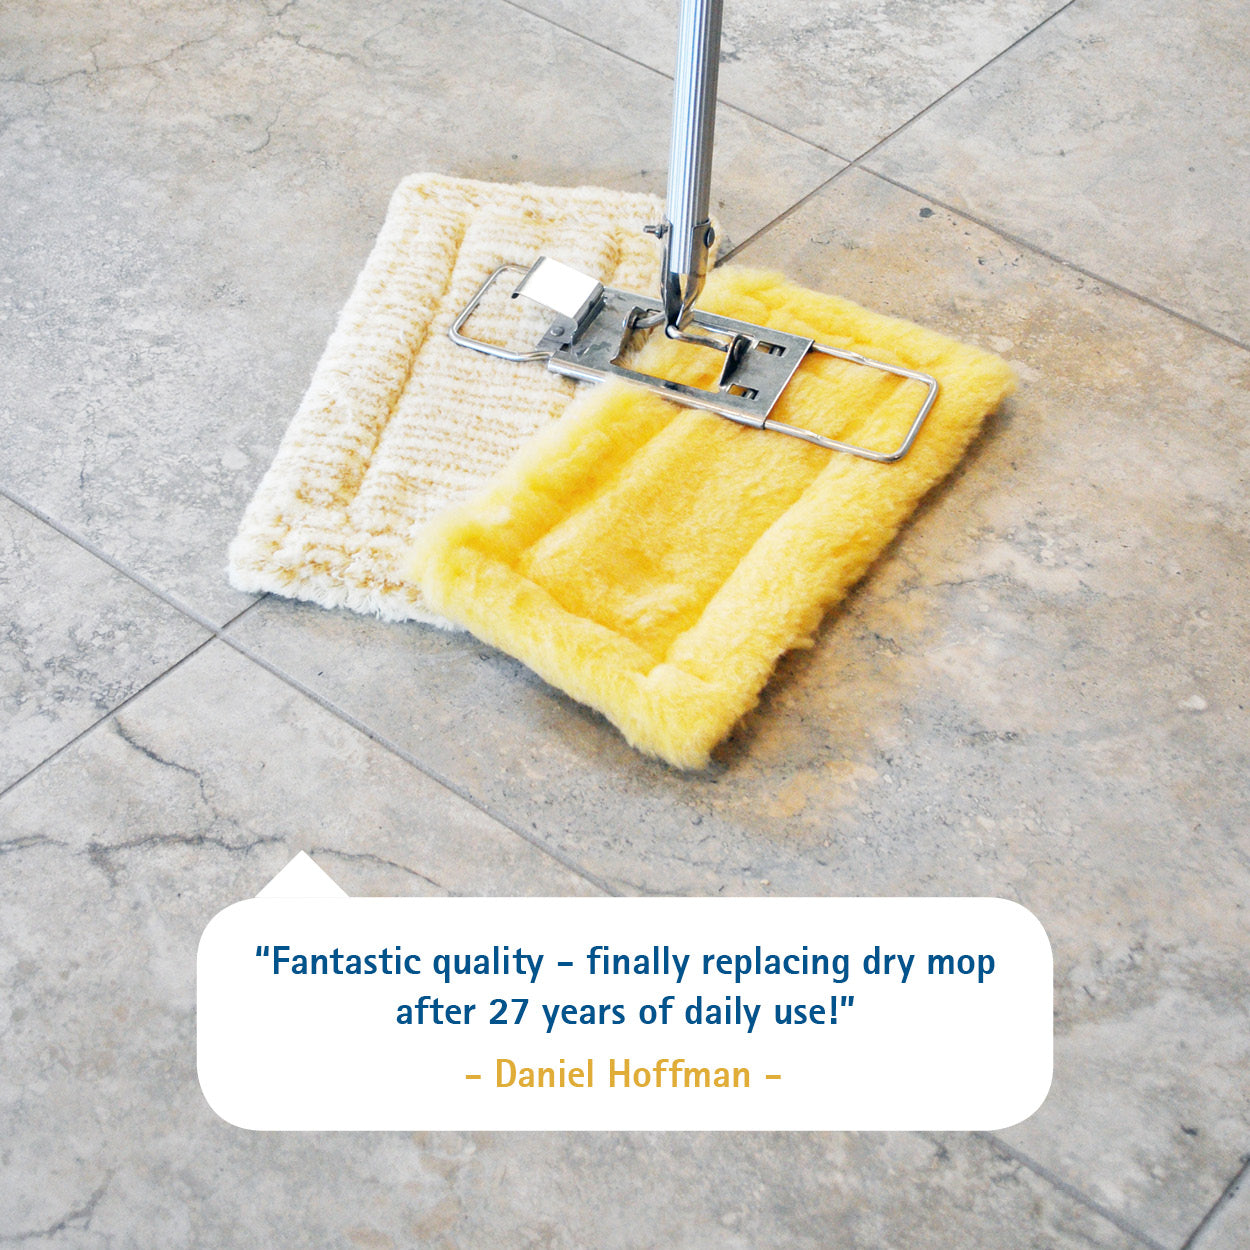 What sets the Ha-Ra mop apart from regular mops?